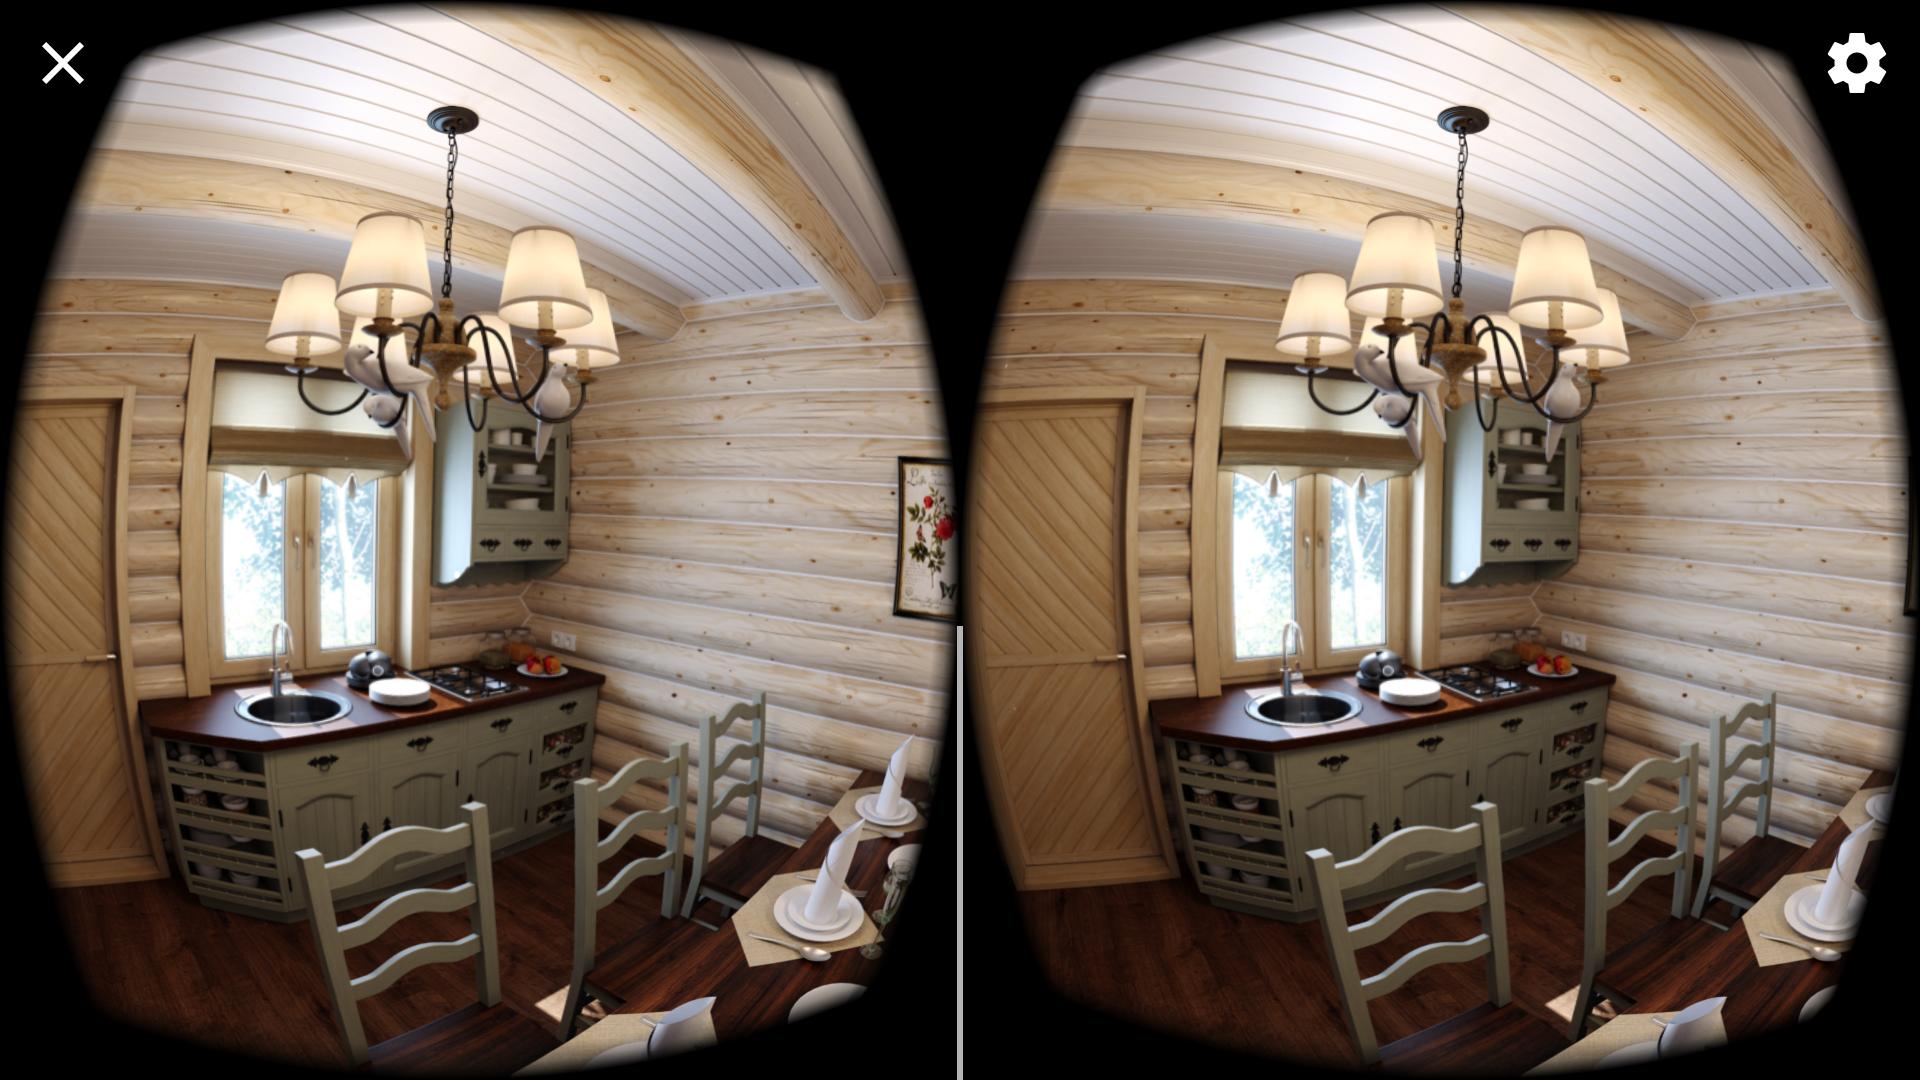 Kitchen VR for Android - APK Download